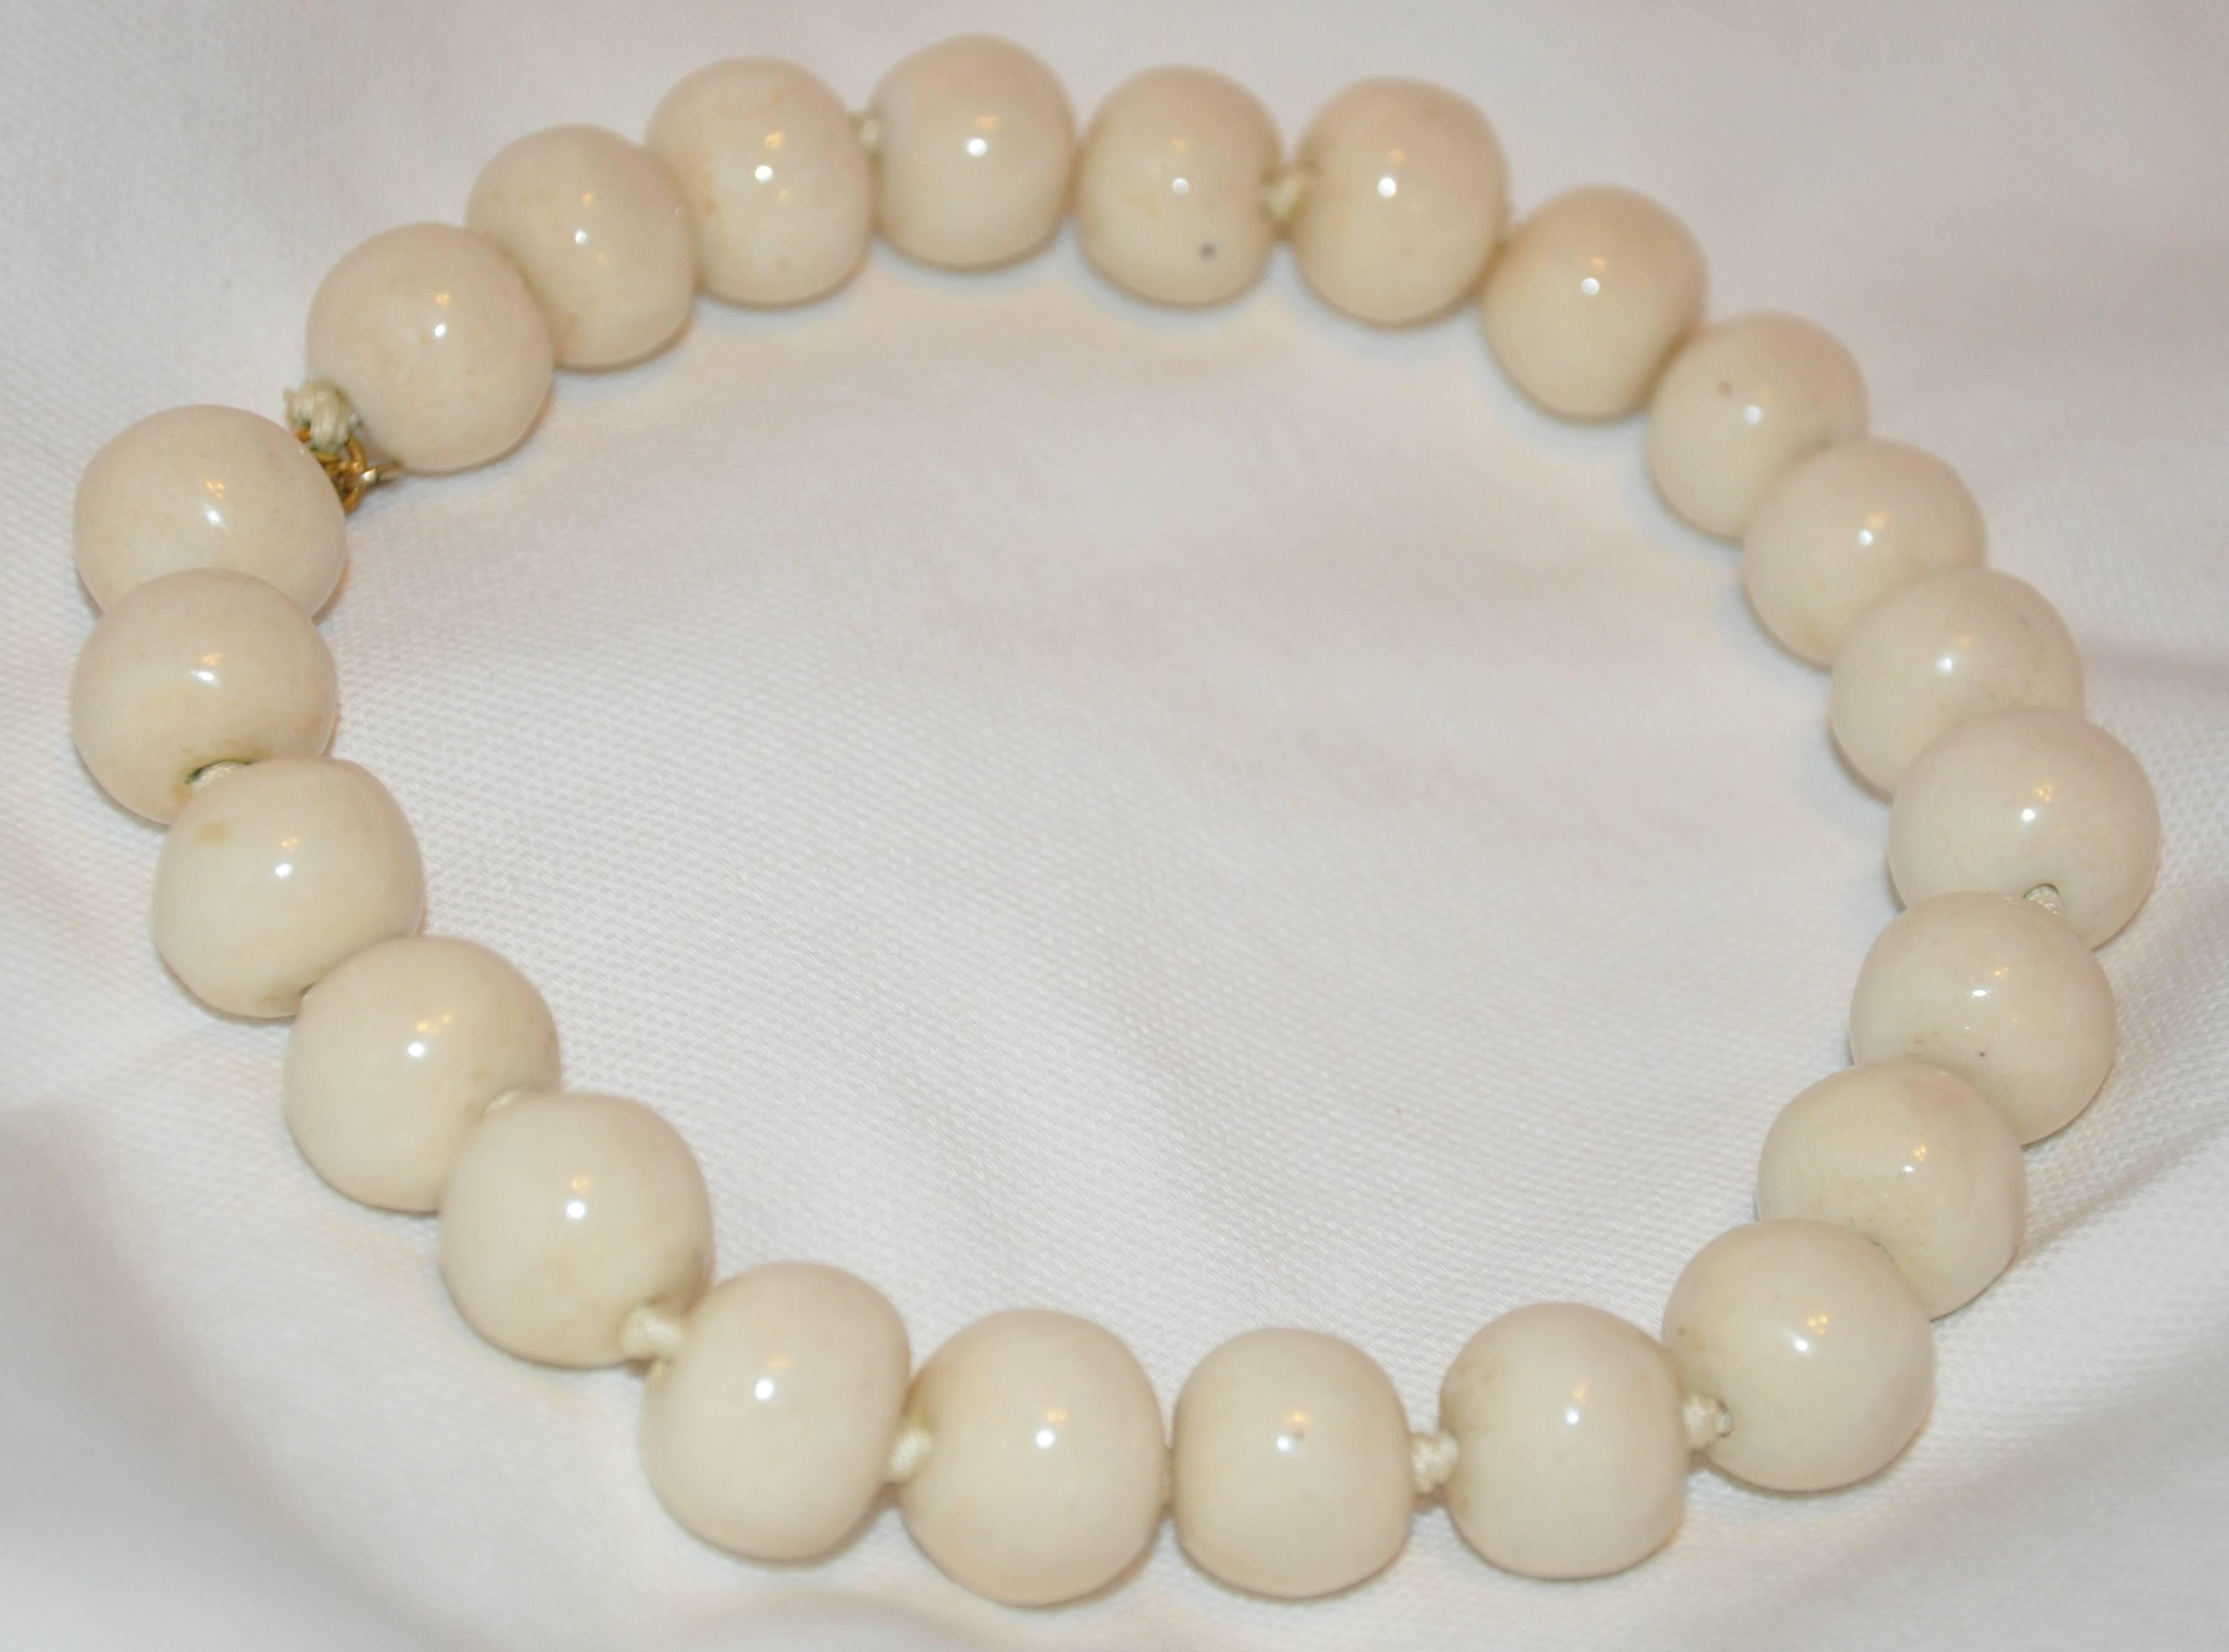        Kenneth Jay Lane whimsical chunky cream-colored hand-knotted necklace measures 15 inches in length with a width of 3/4. 